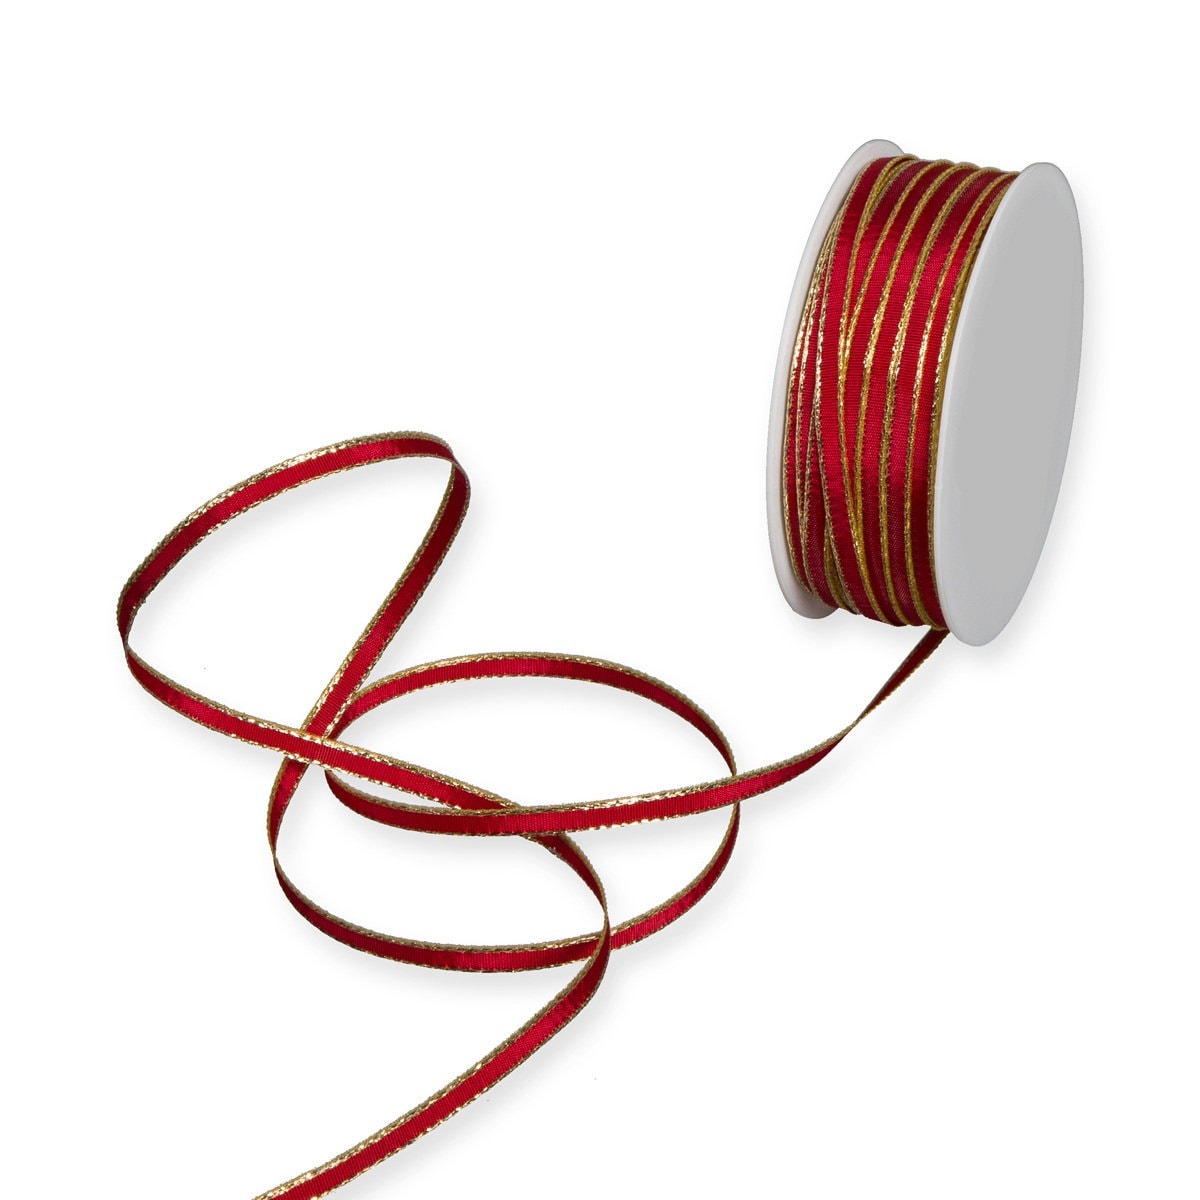 Curling Ribbon Spool Crimped 3/16 500 Yards 1500 Feet, Offering 27 Colors,  for Balloons, Favors and Gifts 